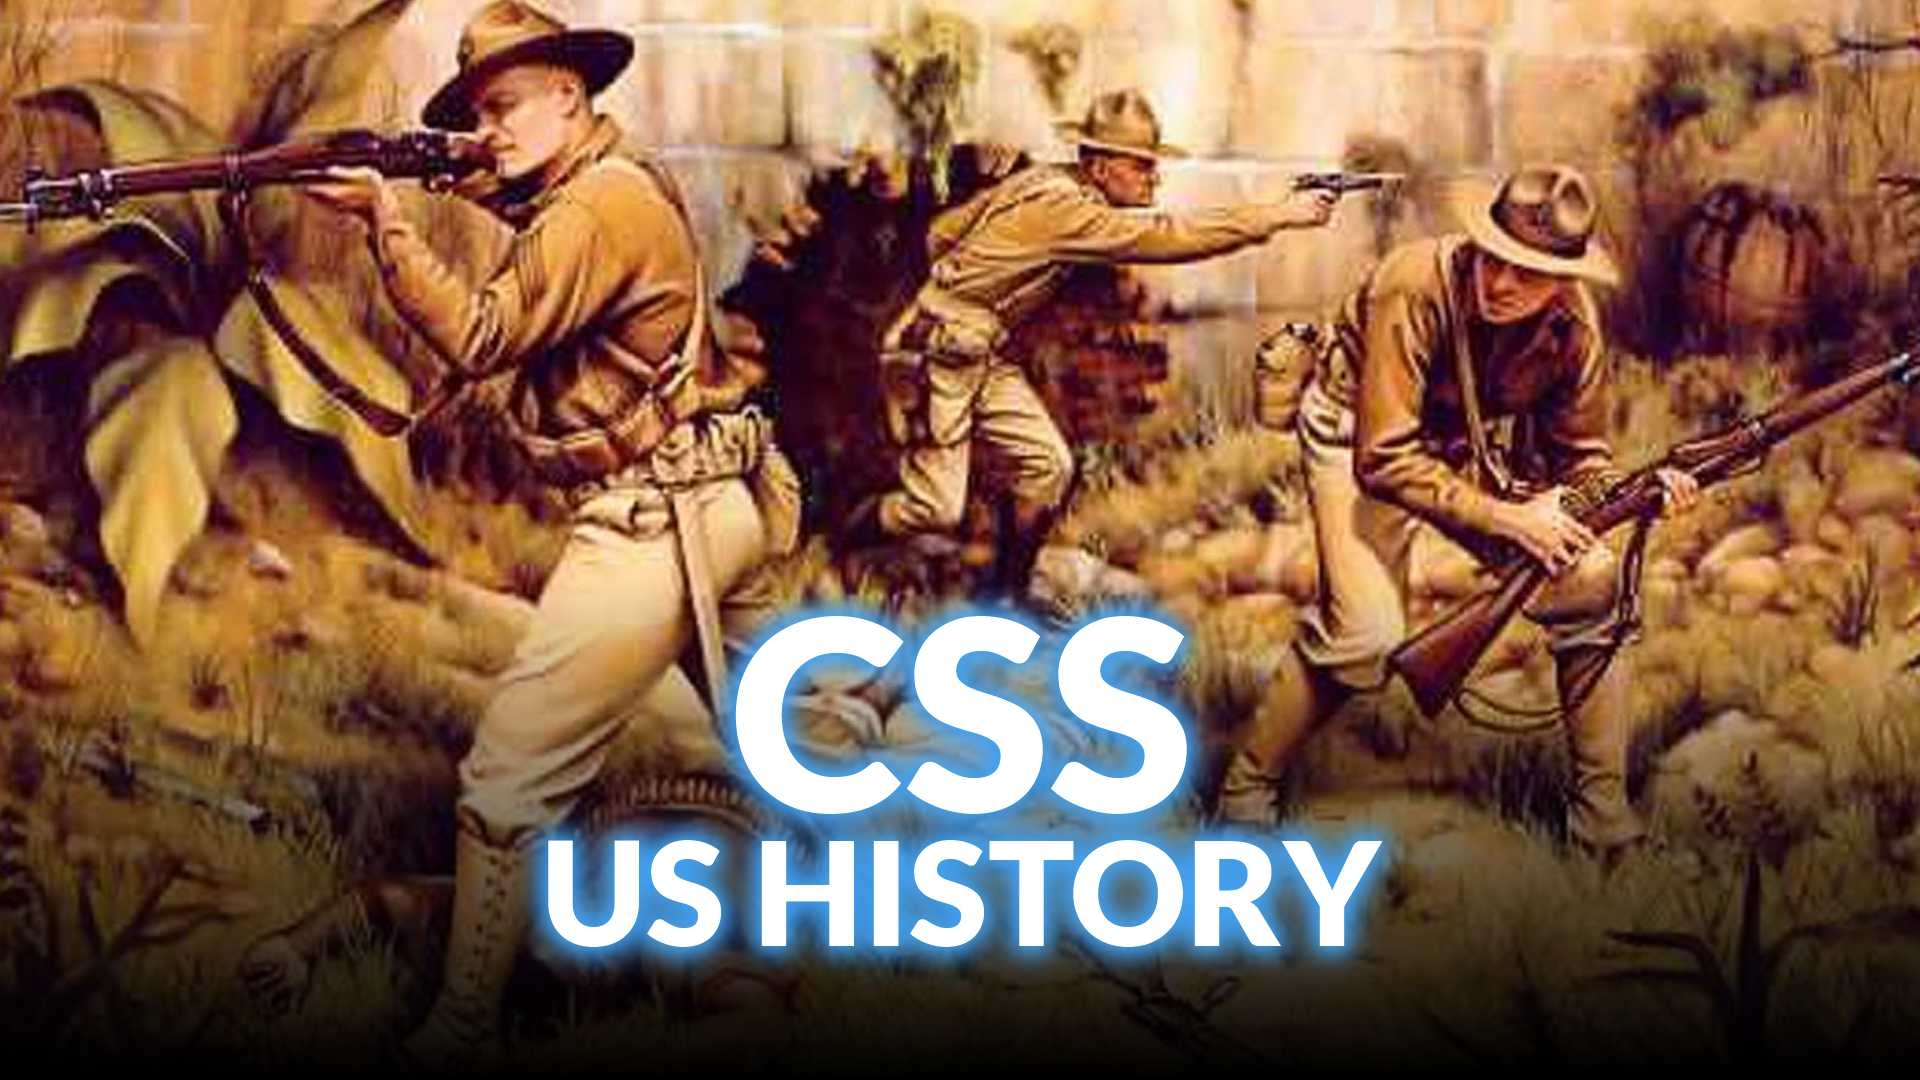 Ultimate CSS US History Preparation Course